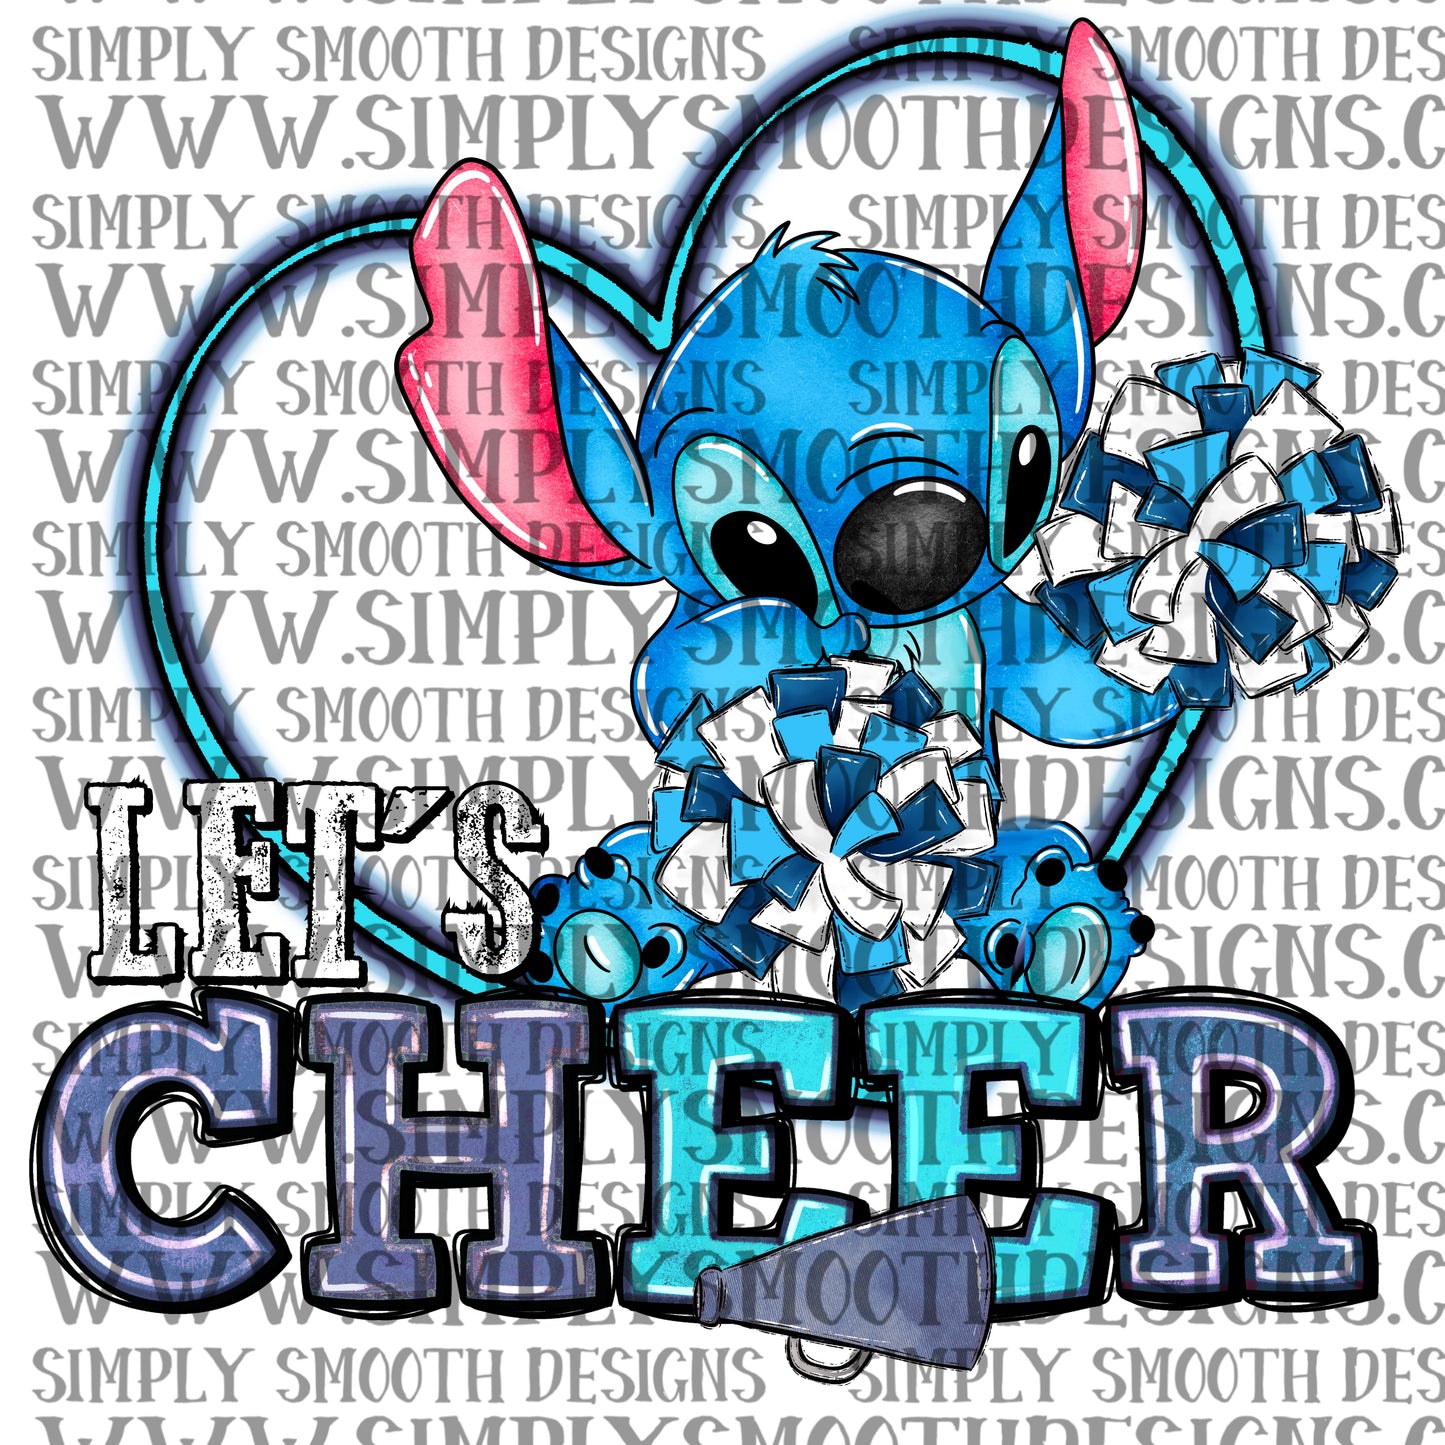 Let’s cheer